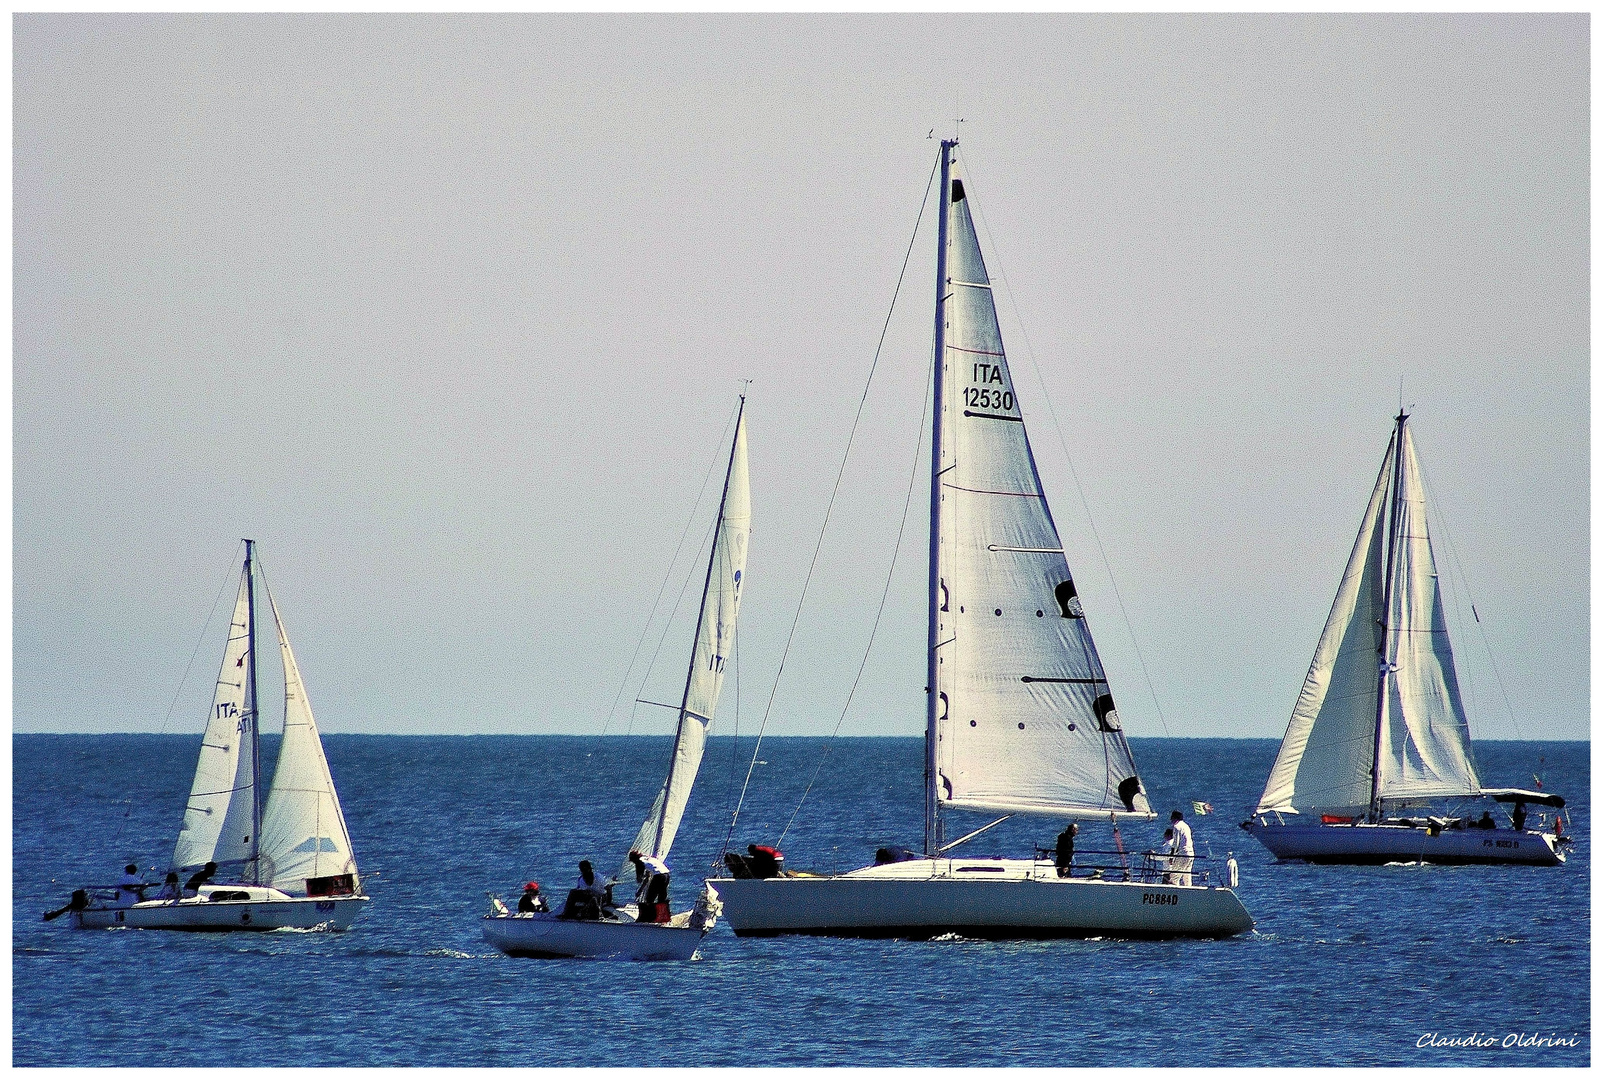 Sails for racing